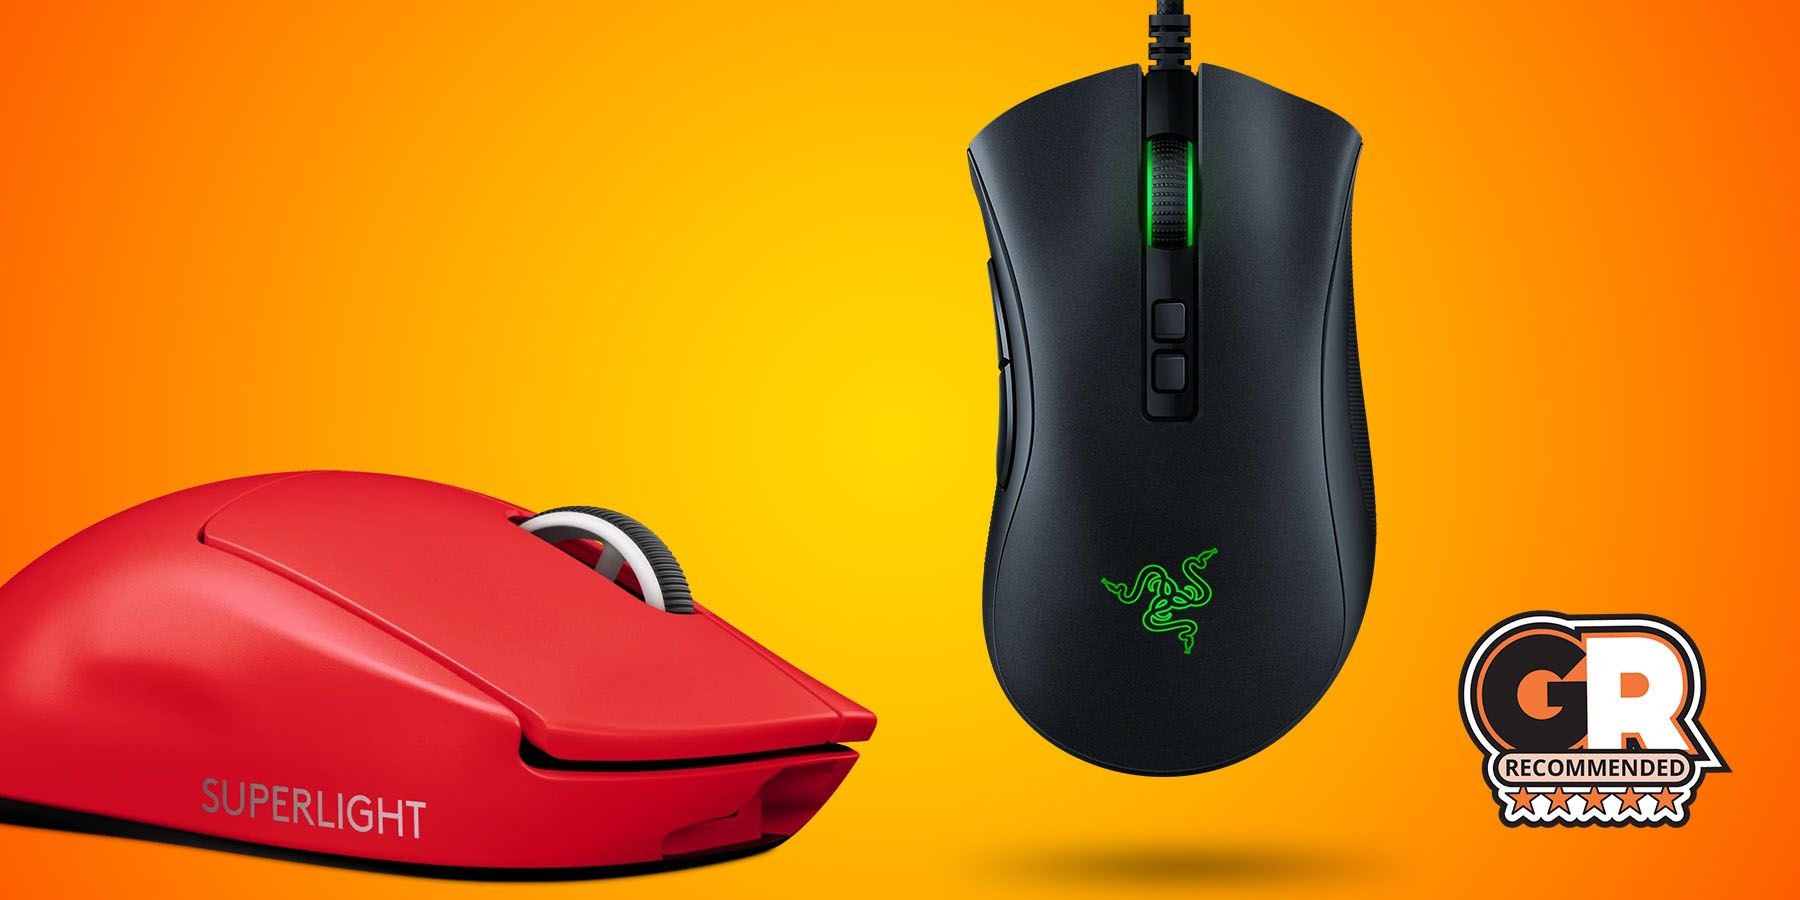 Razer DeathAdder V3 Pro review: Supreme mouse performance and